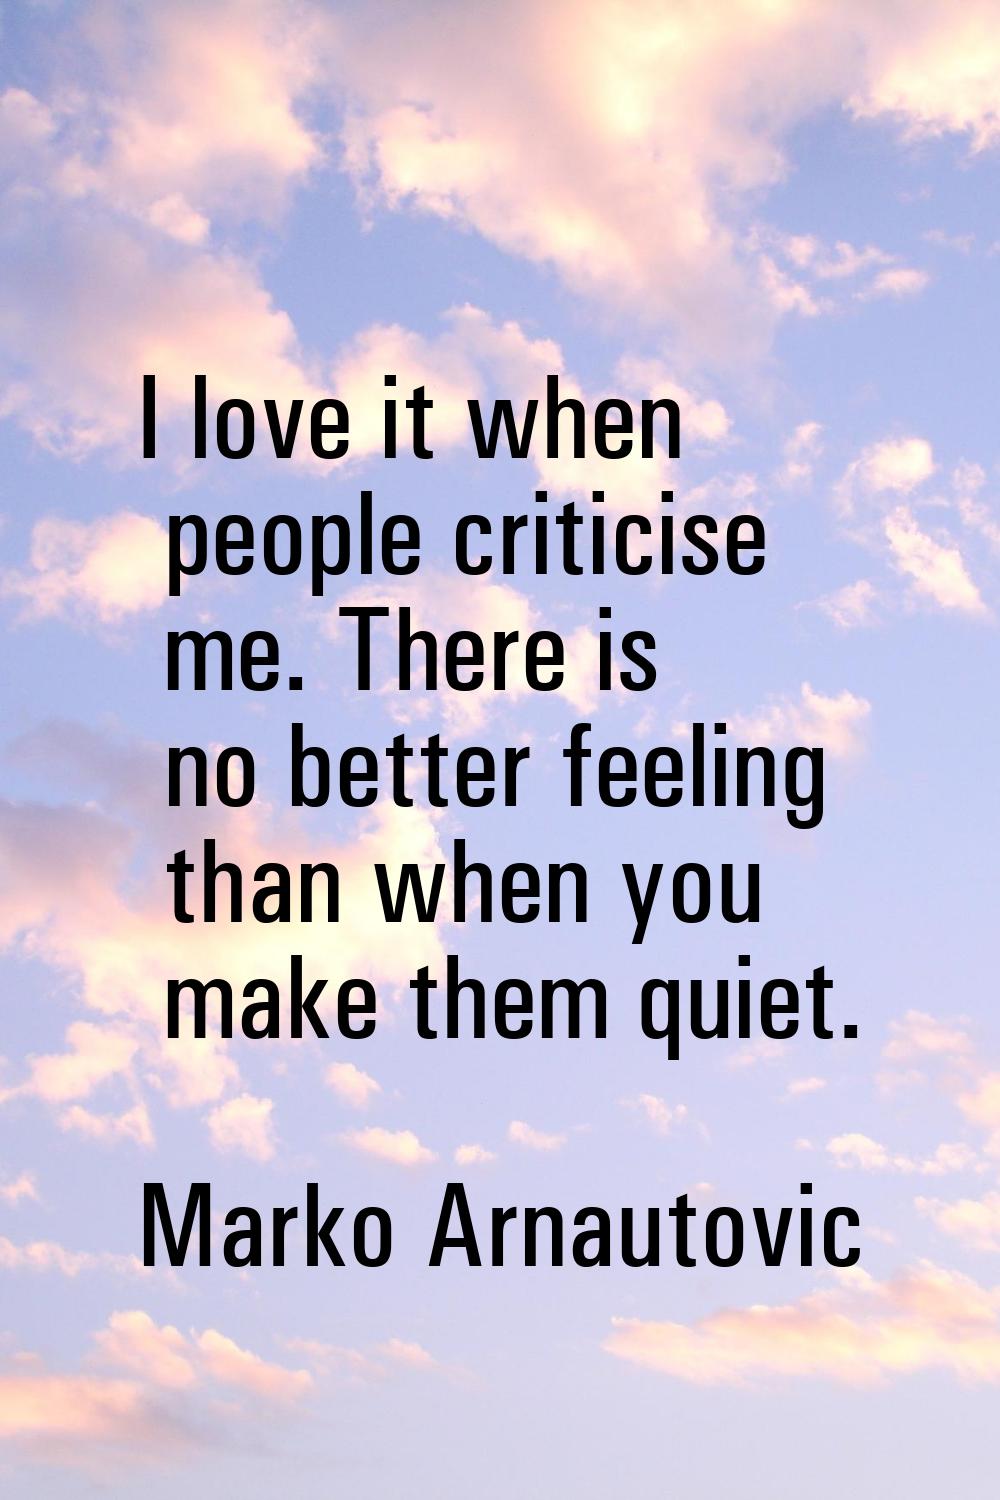 I love it when people criticise me. There is no better feeling than when you make them quiet.